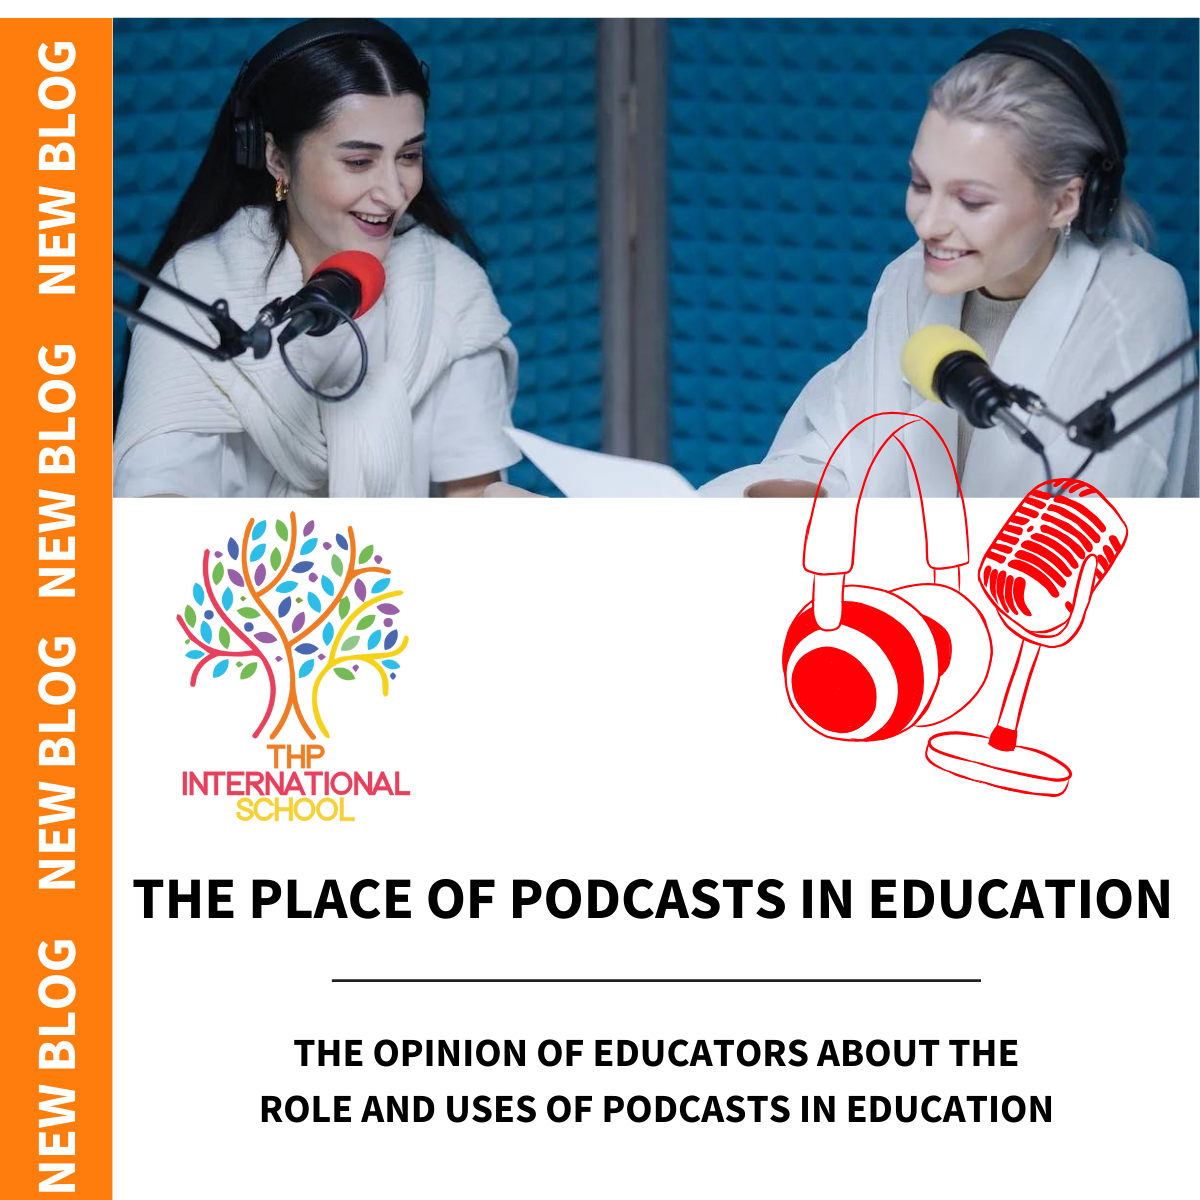 The role of podcasts in education